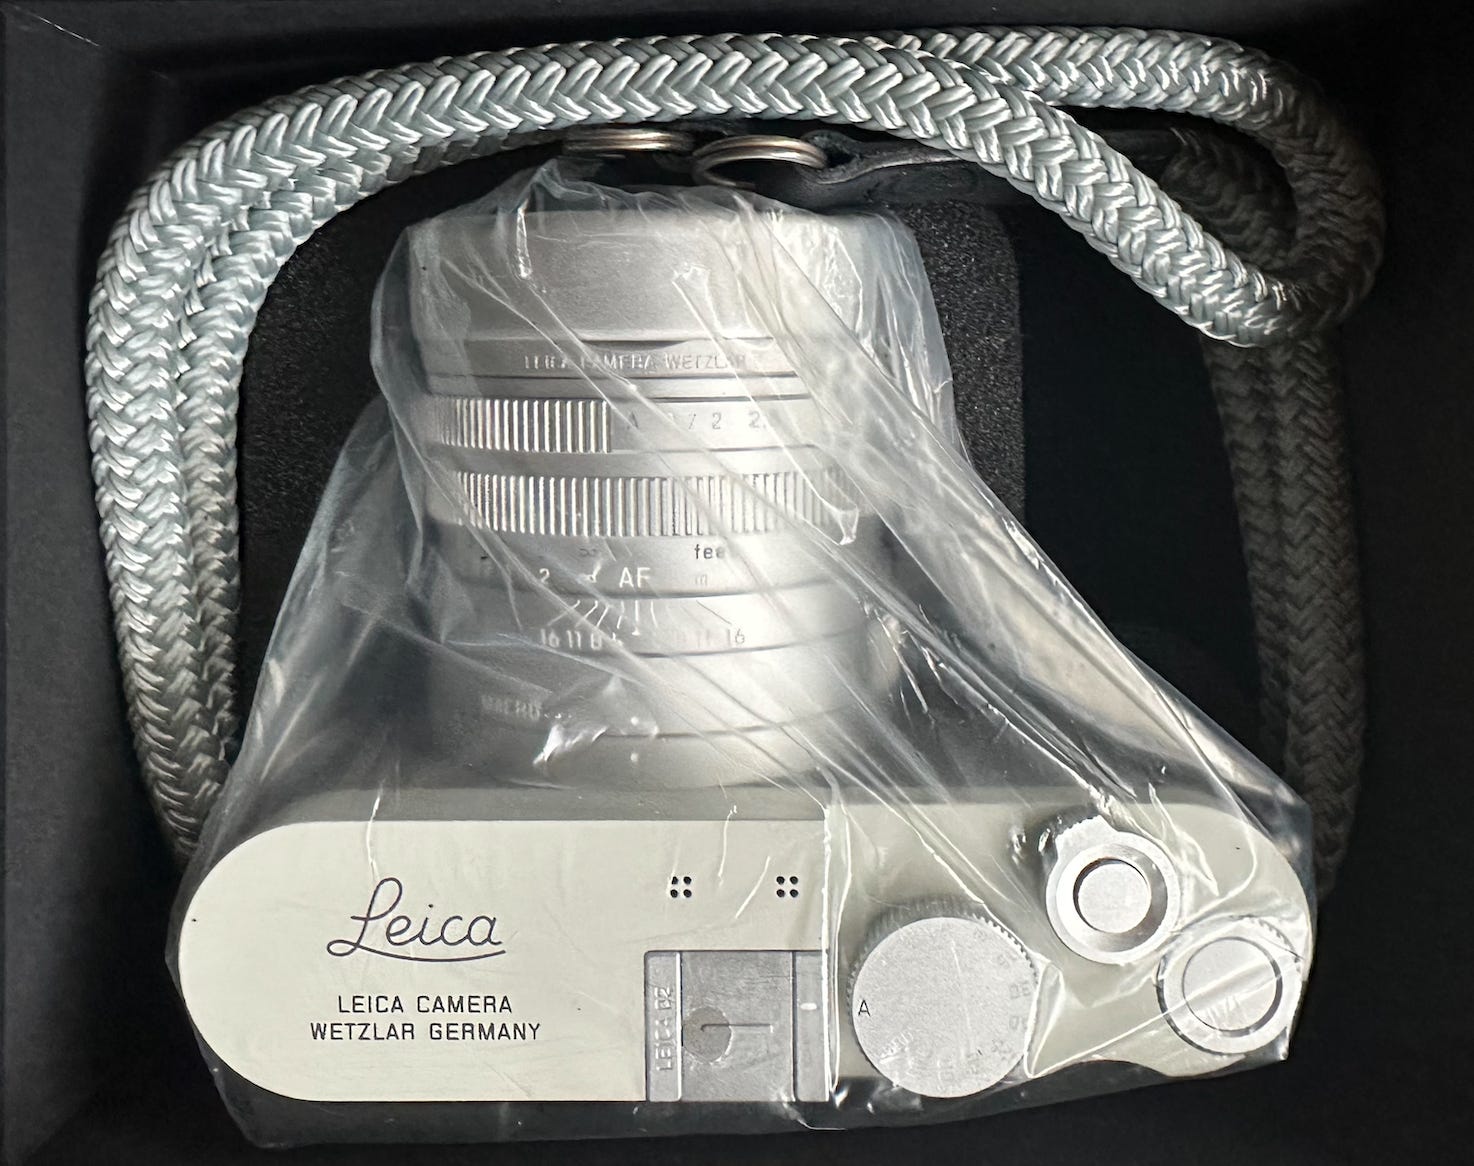 Camera Review: Leica Q2 “Ghost” Set By Hodinkee